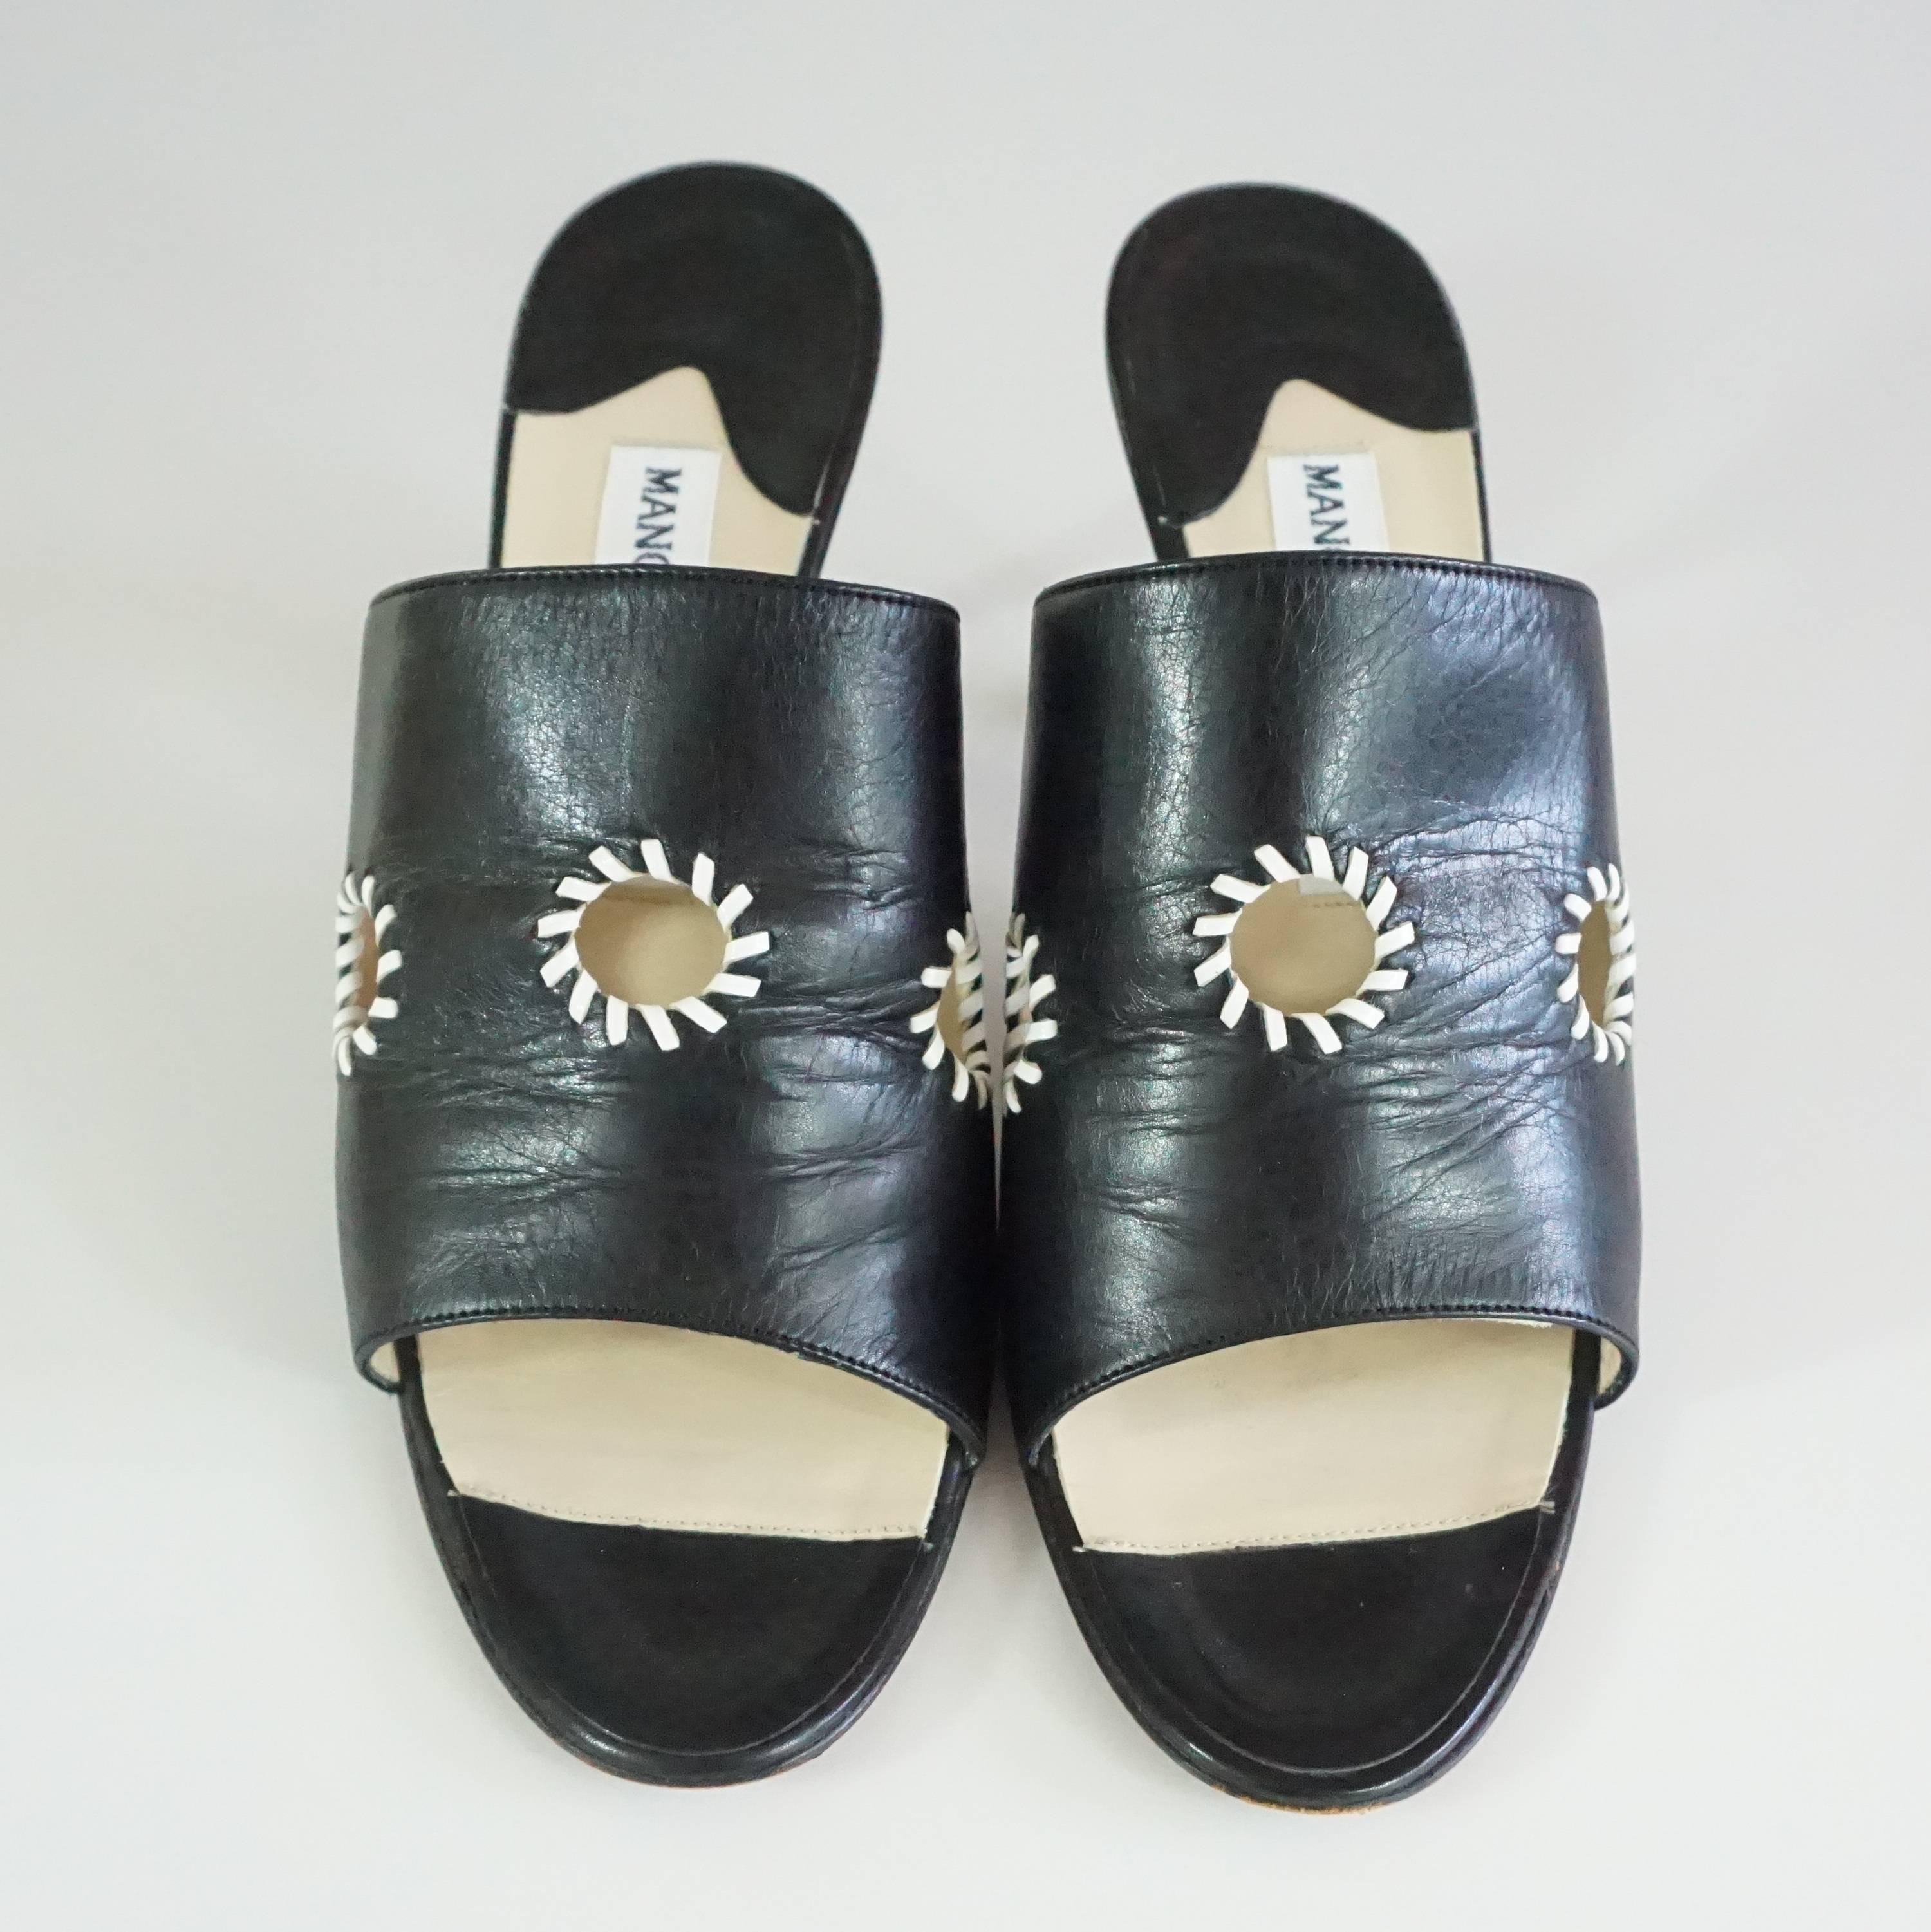 Manolo Blahnik Black Leather Mules with White Stitched Cutouts - 37 2